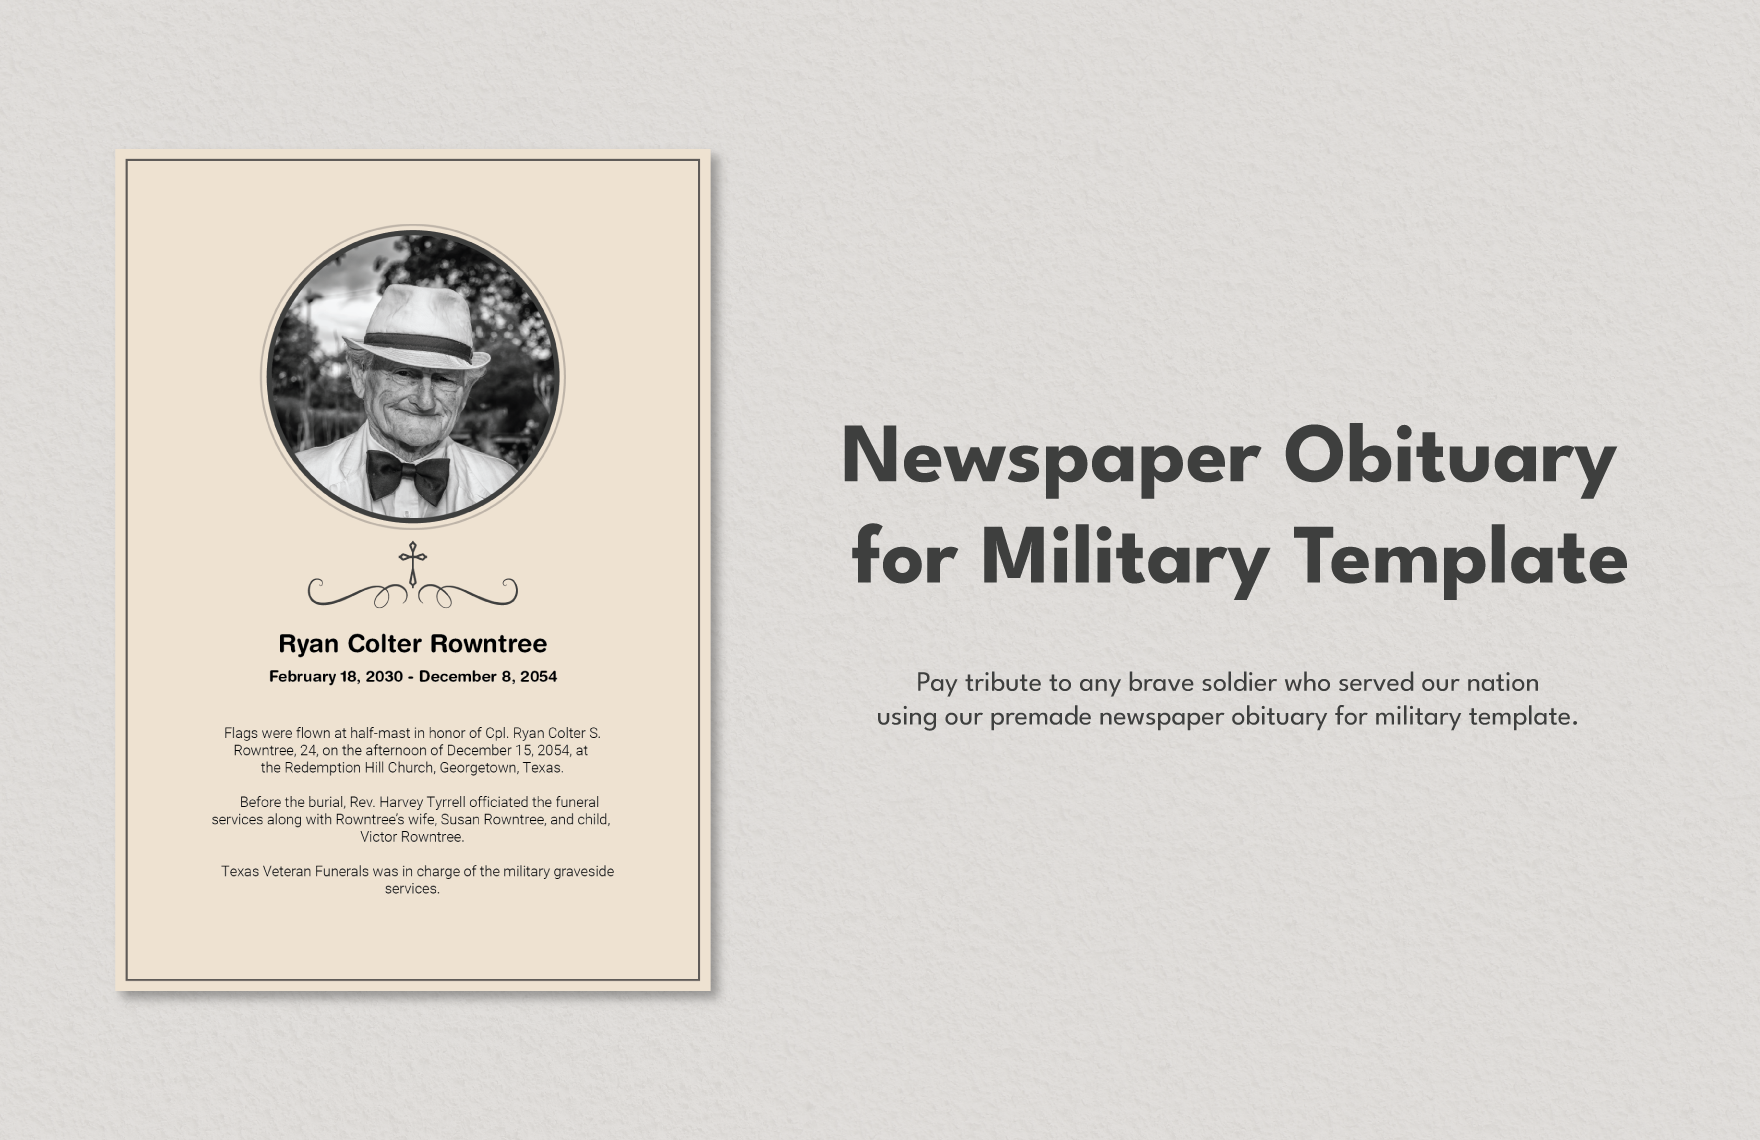 Newspaper Obituary for Military Templates